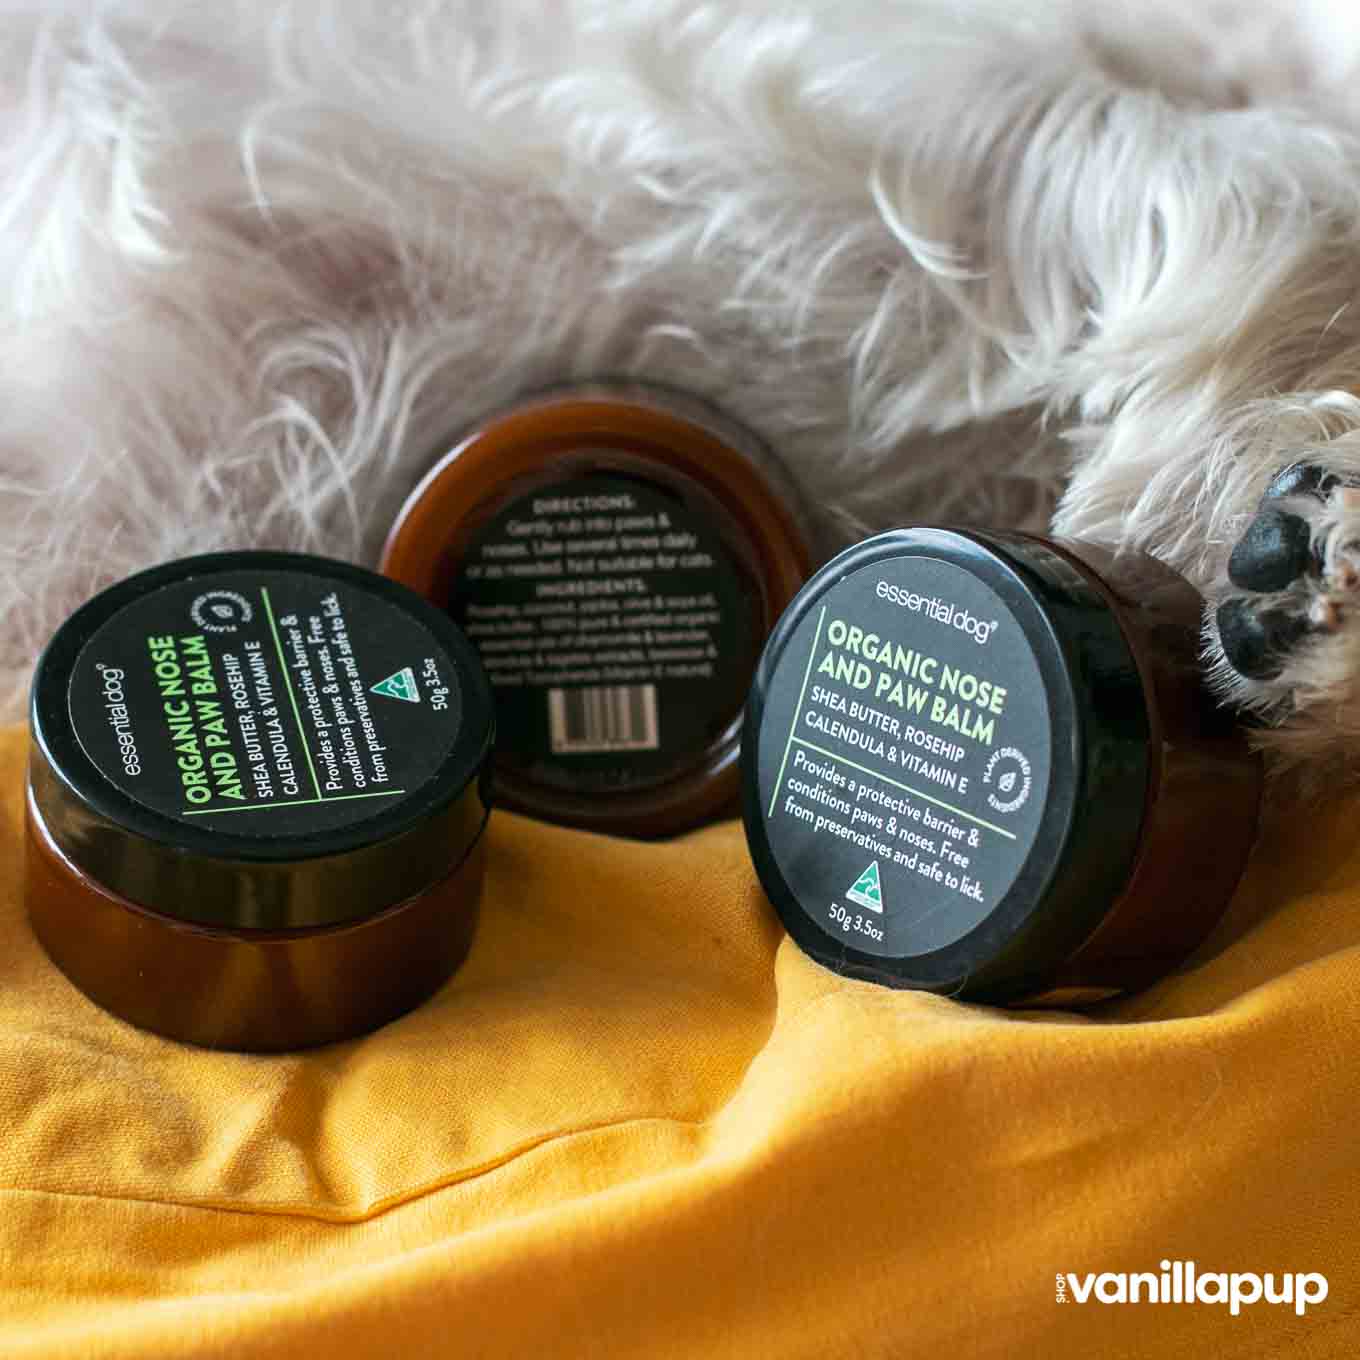 Essential Dog Organic Nose and Paw Balm (50g) - Vanillapup Online Pet Store